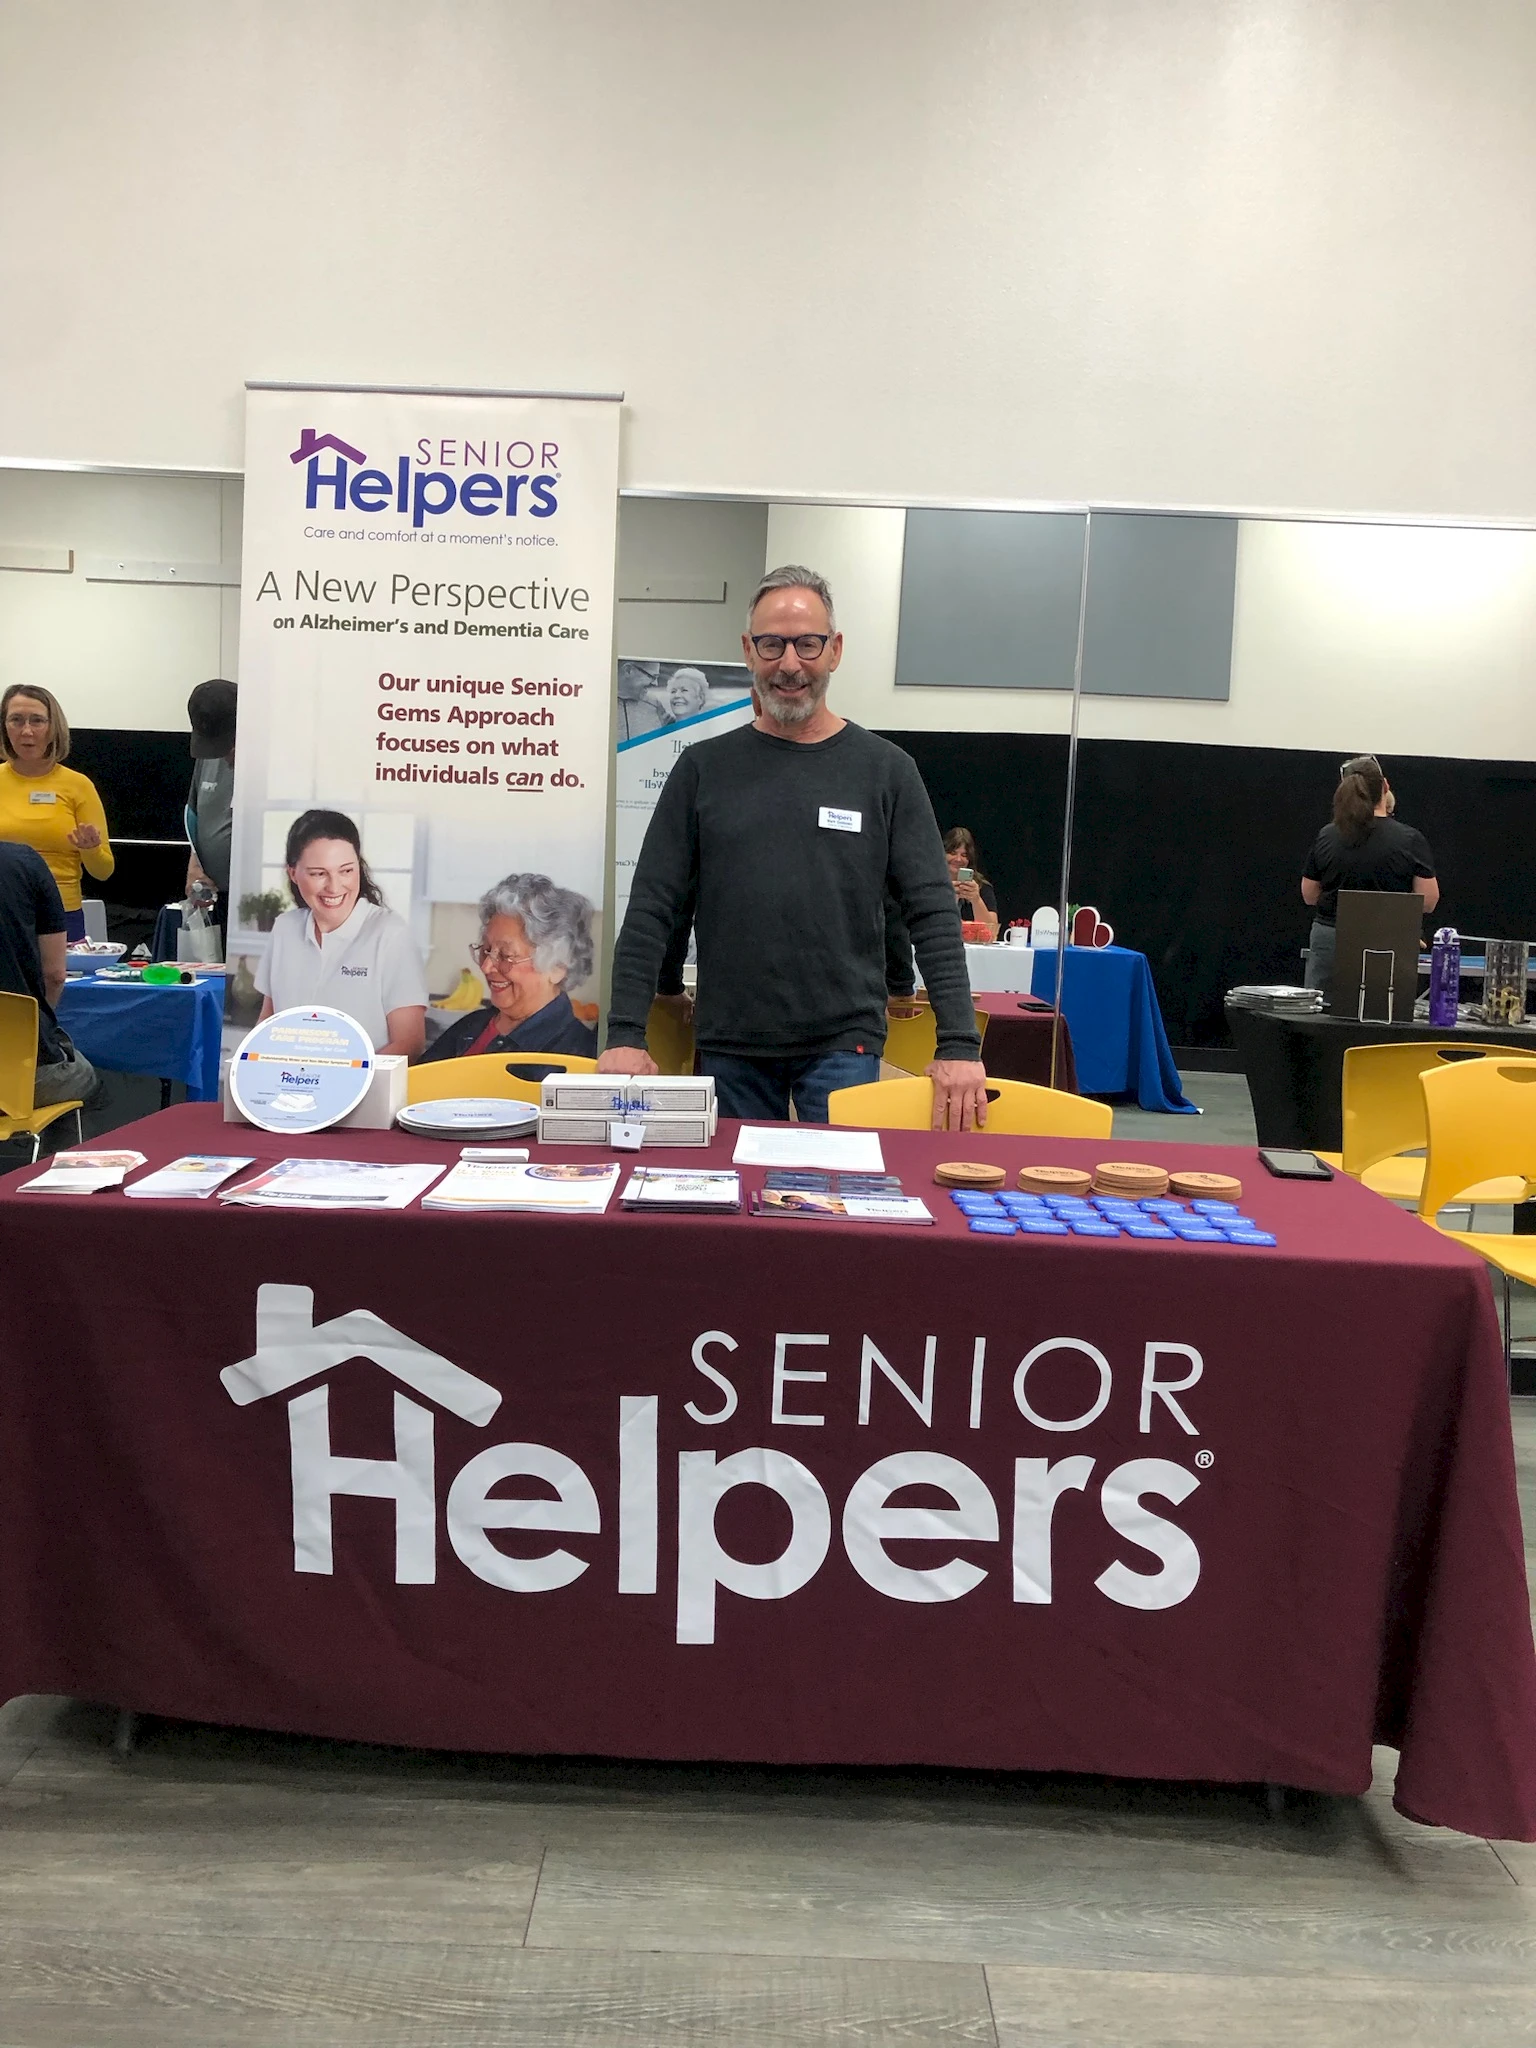 A fun and informative day for Senior Helpers at the Parkinson's Wellness Recovery Open House!